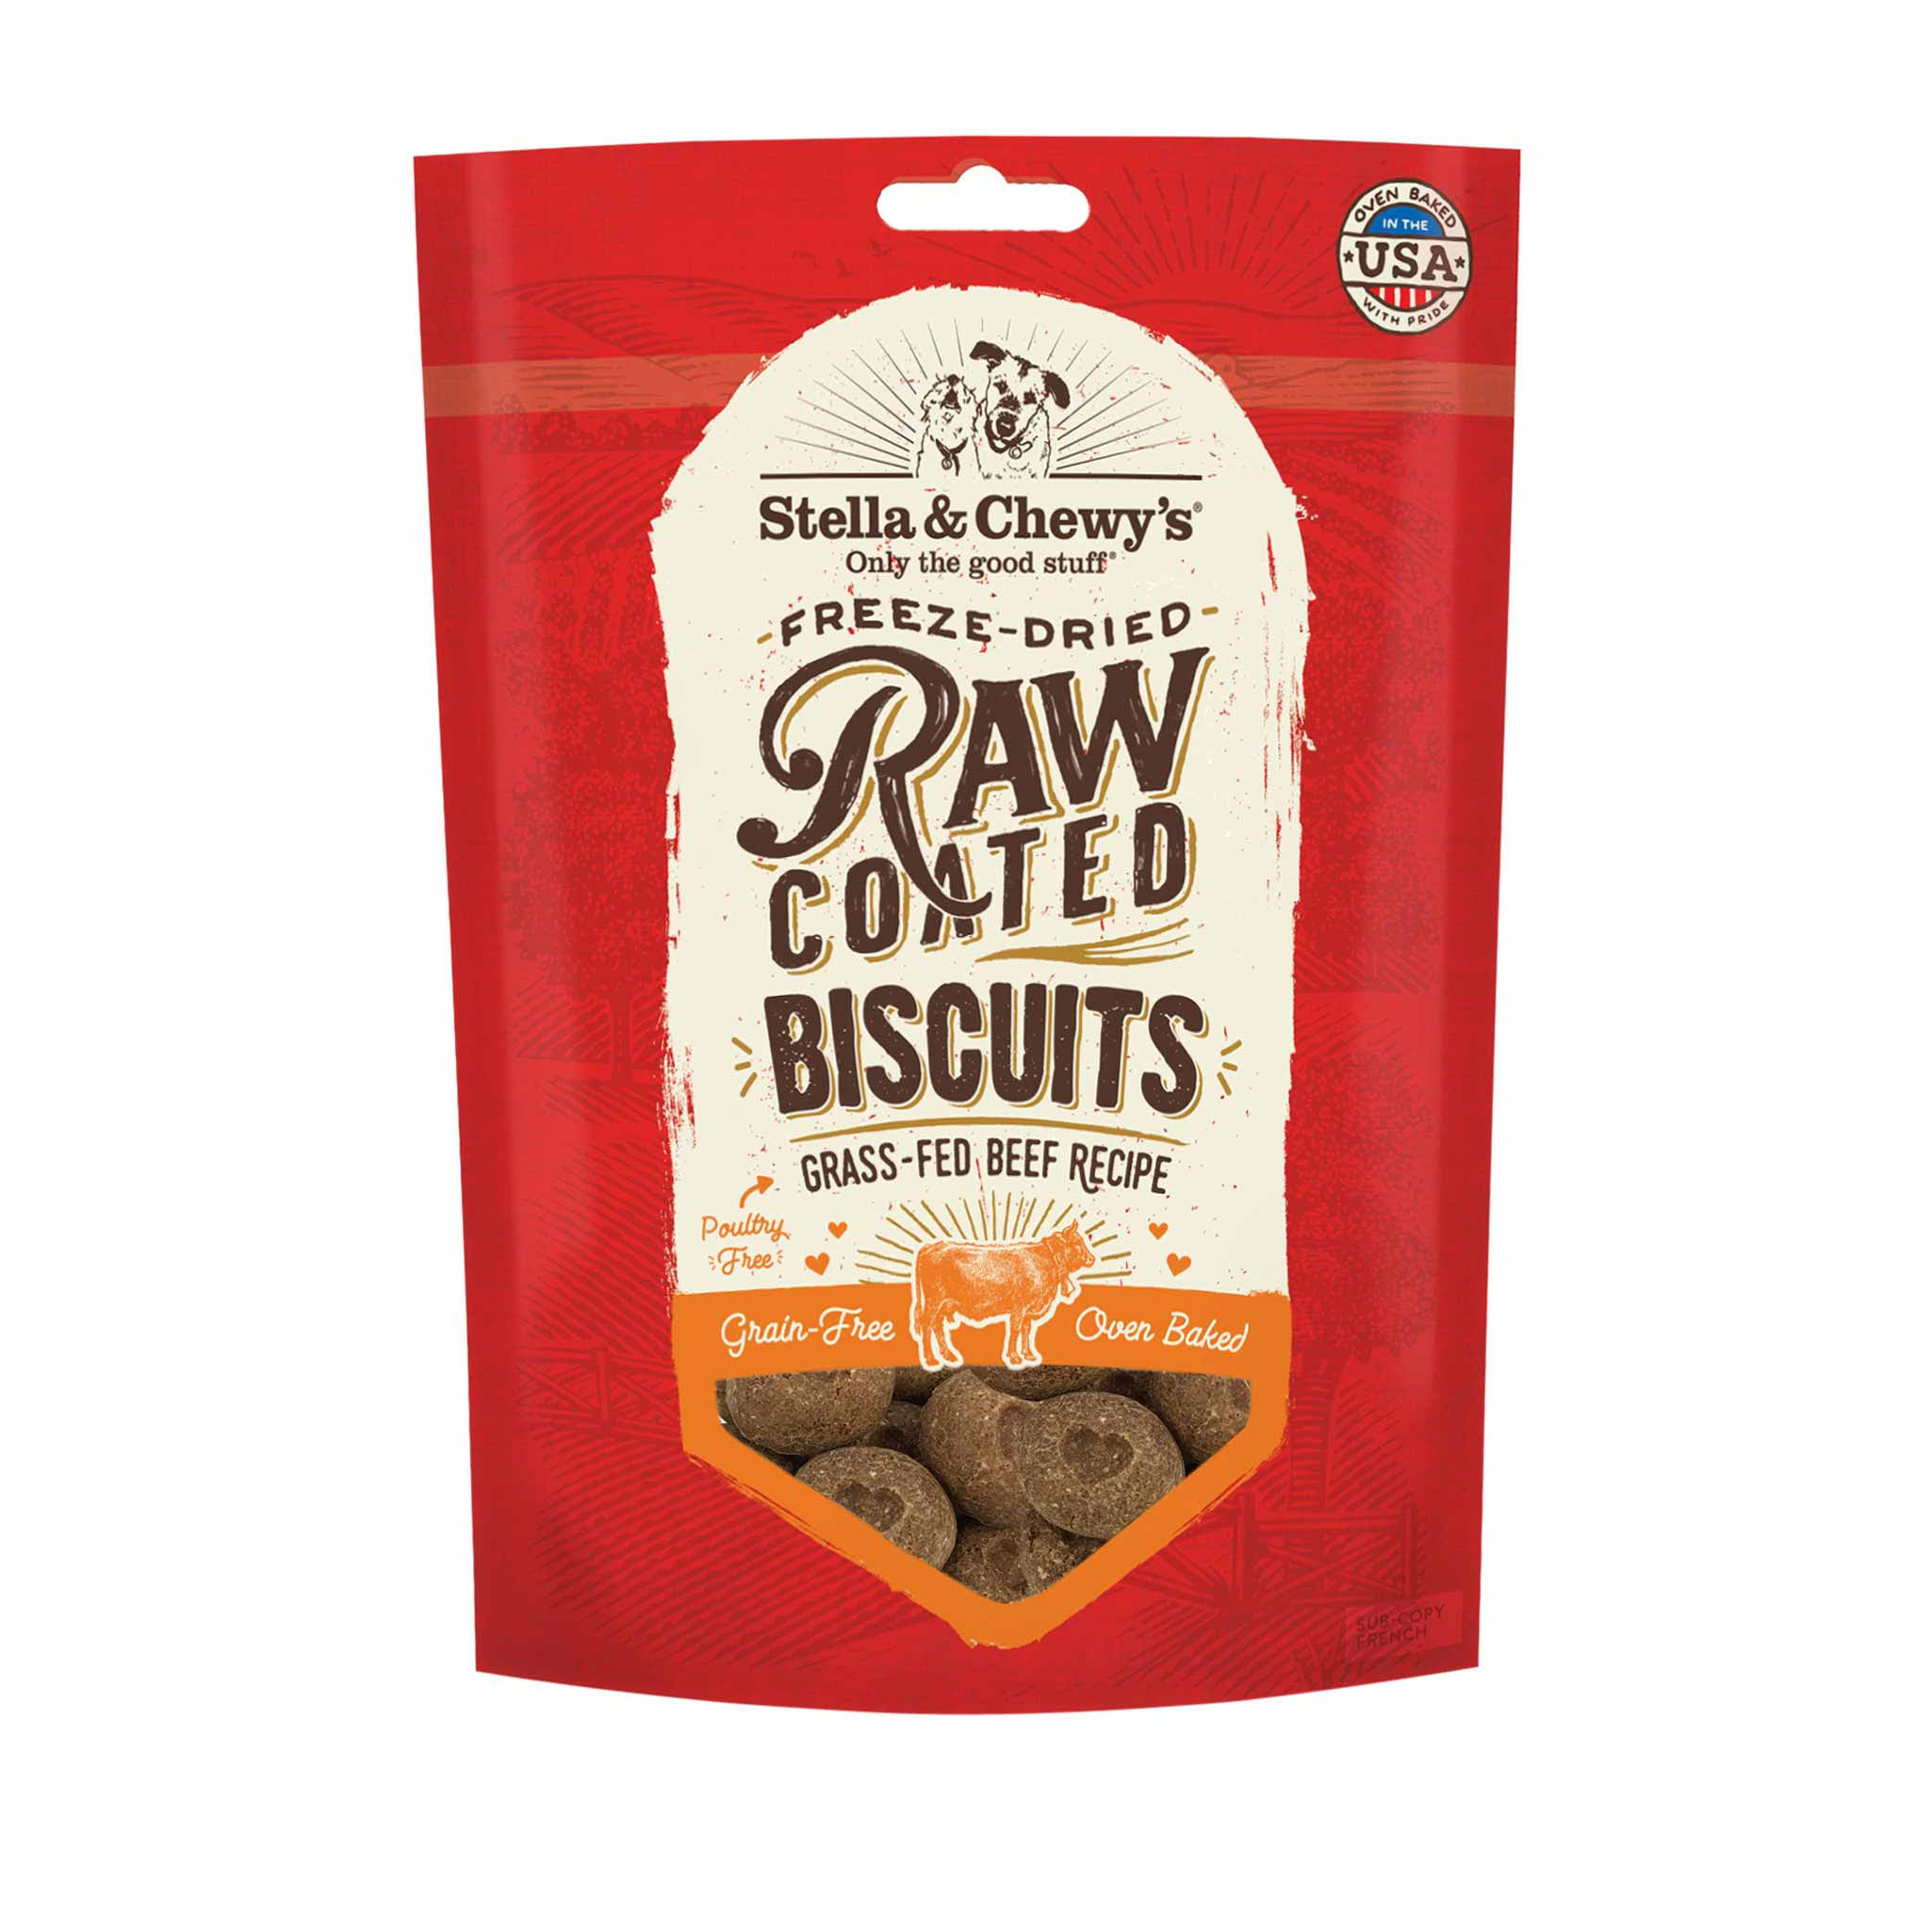 Stella & Chewy's Raw Coated Biscuits - Beef Recipe, 9oz